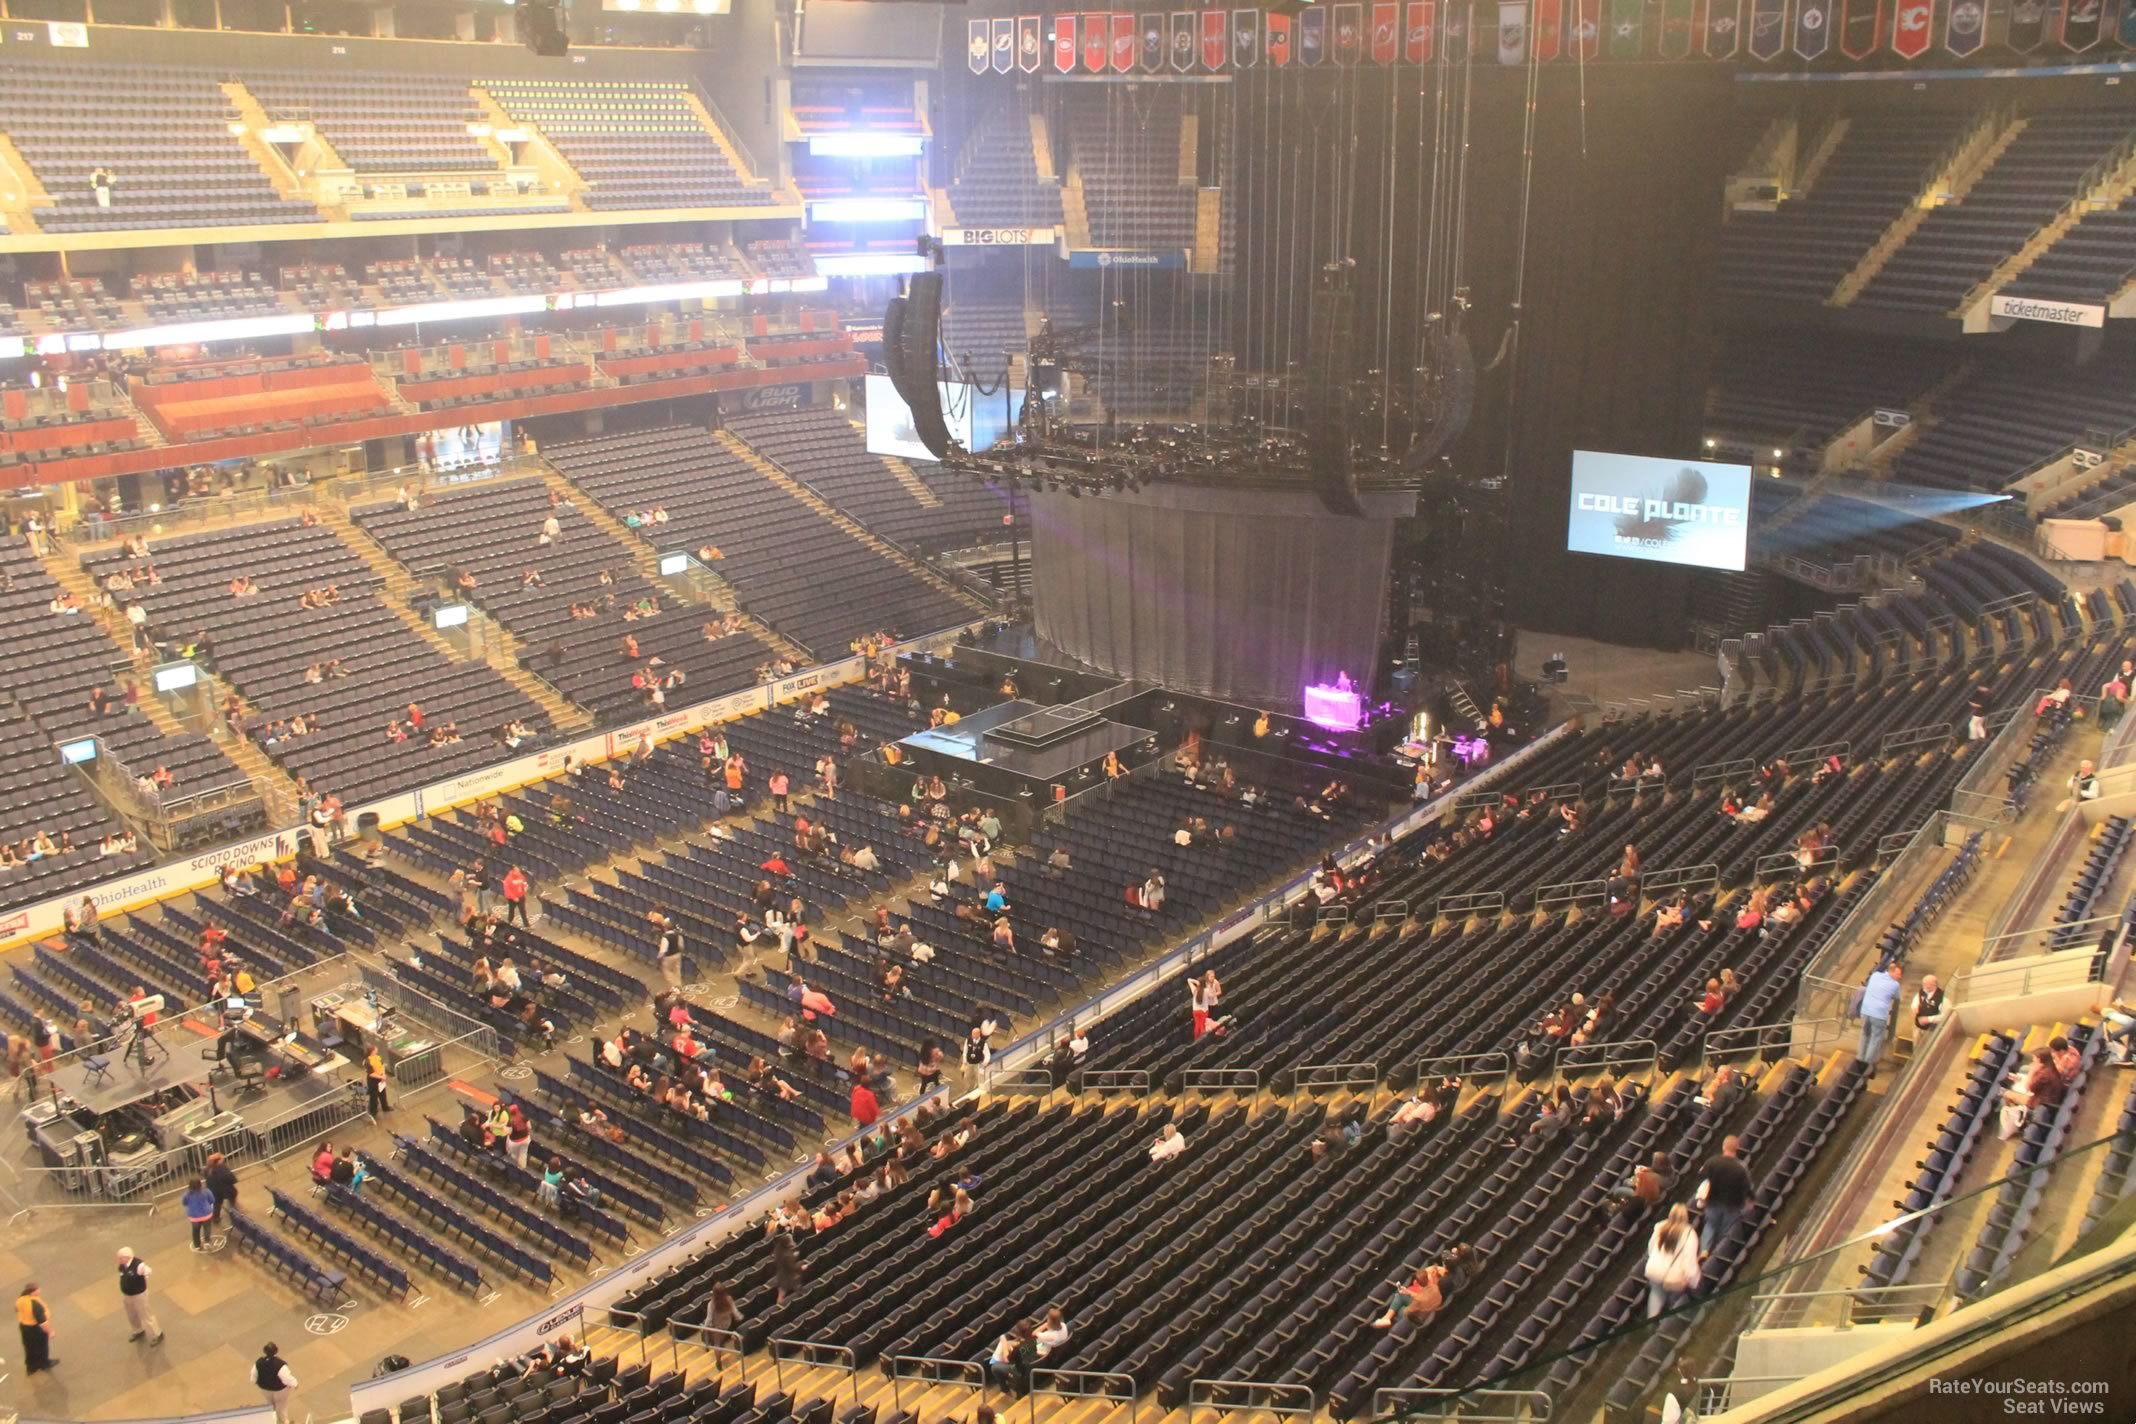 Section 207 at Nationwide Arena for Concerts